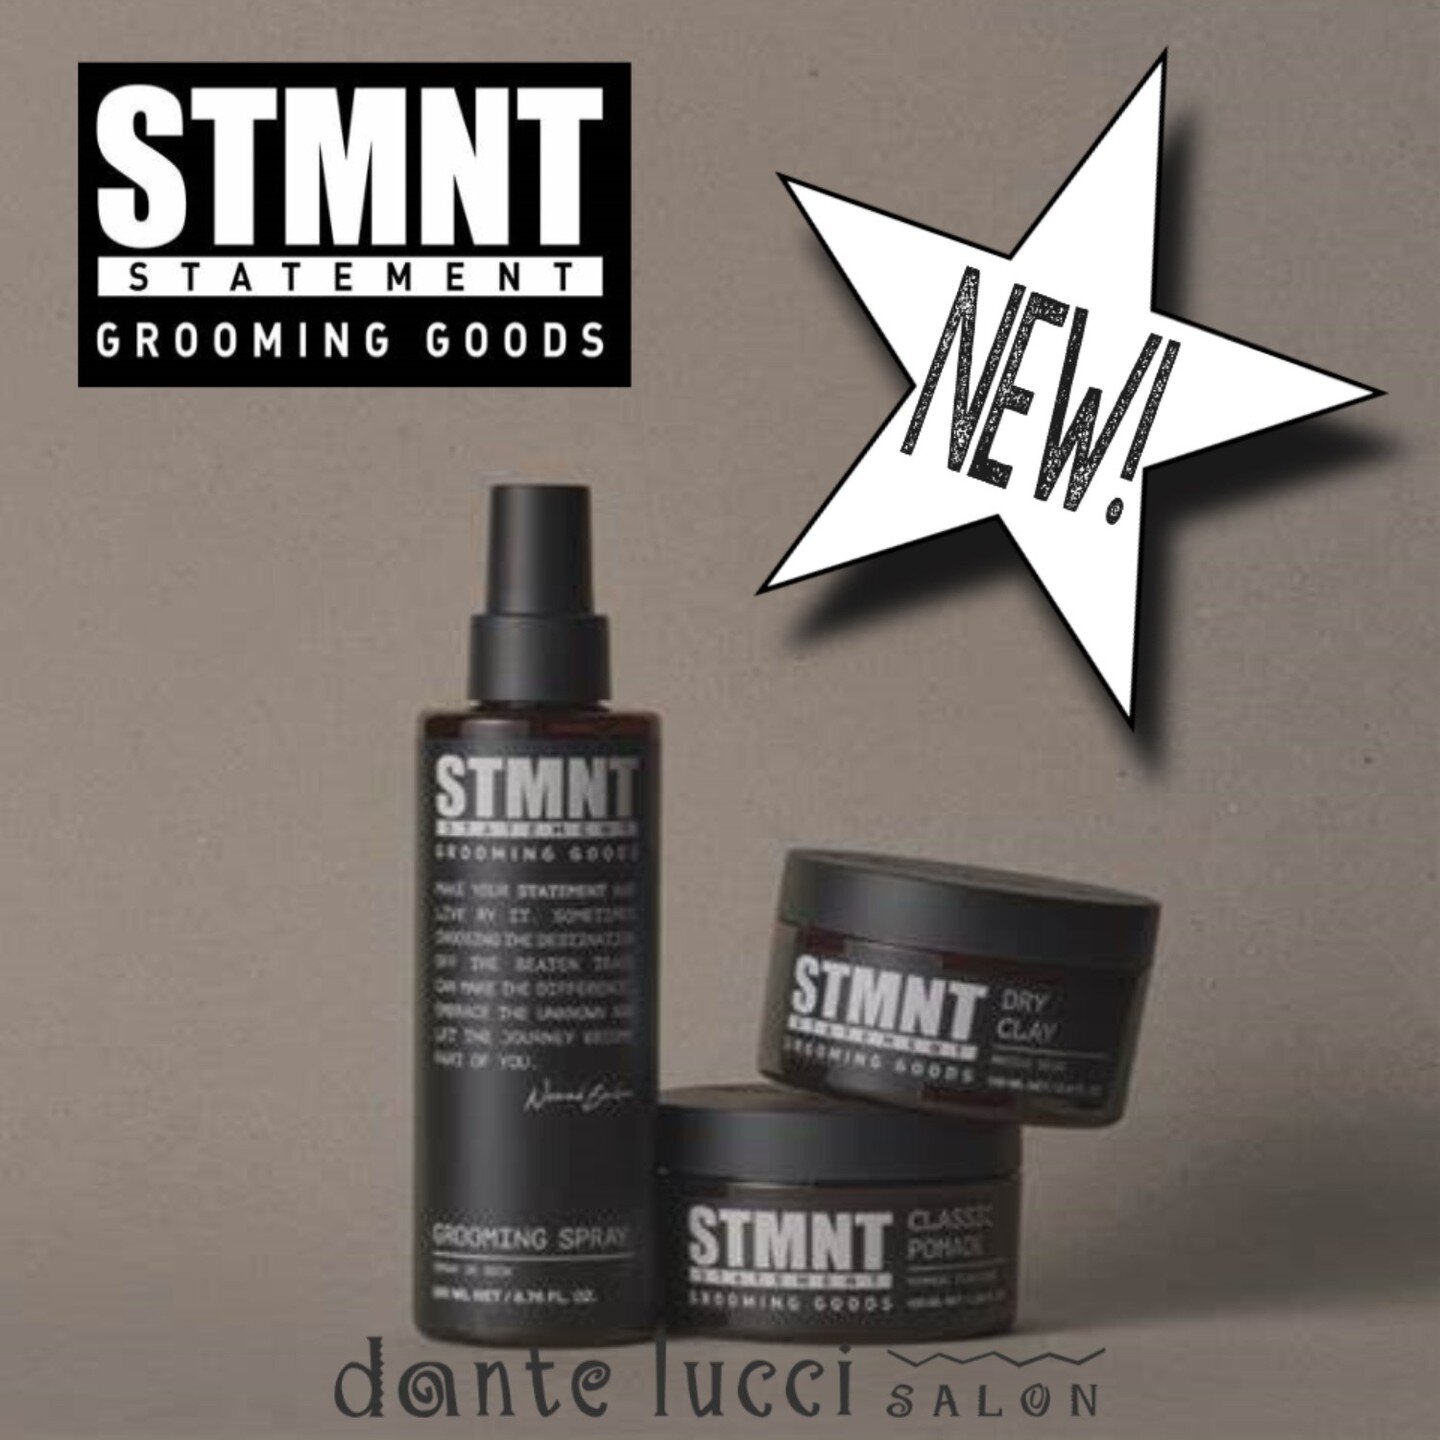 STMNT:  Designed to create the perfect canvas for styling!⁠
🩷⁠
A unique collection of barbering and styling products for modern hairstyles. ... ⁠
🩷⁠
We love them, you will too!⁠
.⁠
.⁠
.⁠
.⁠
.⁠
⁠
#mensretail #mensproduct #mensproducts #beardstyle #b